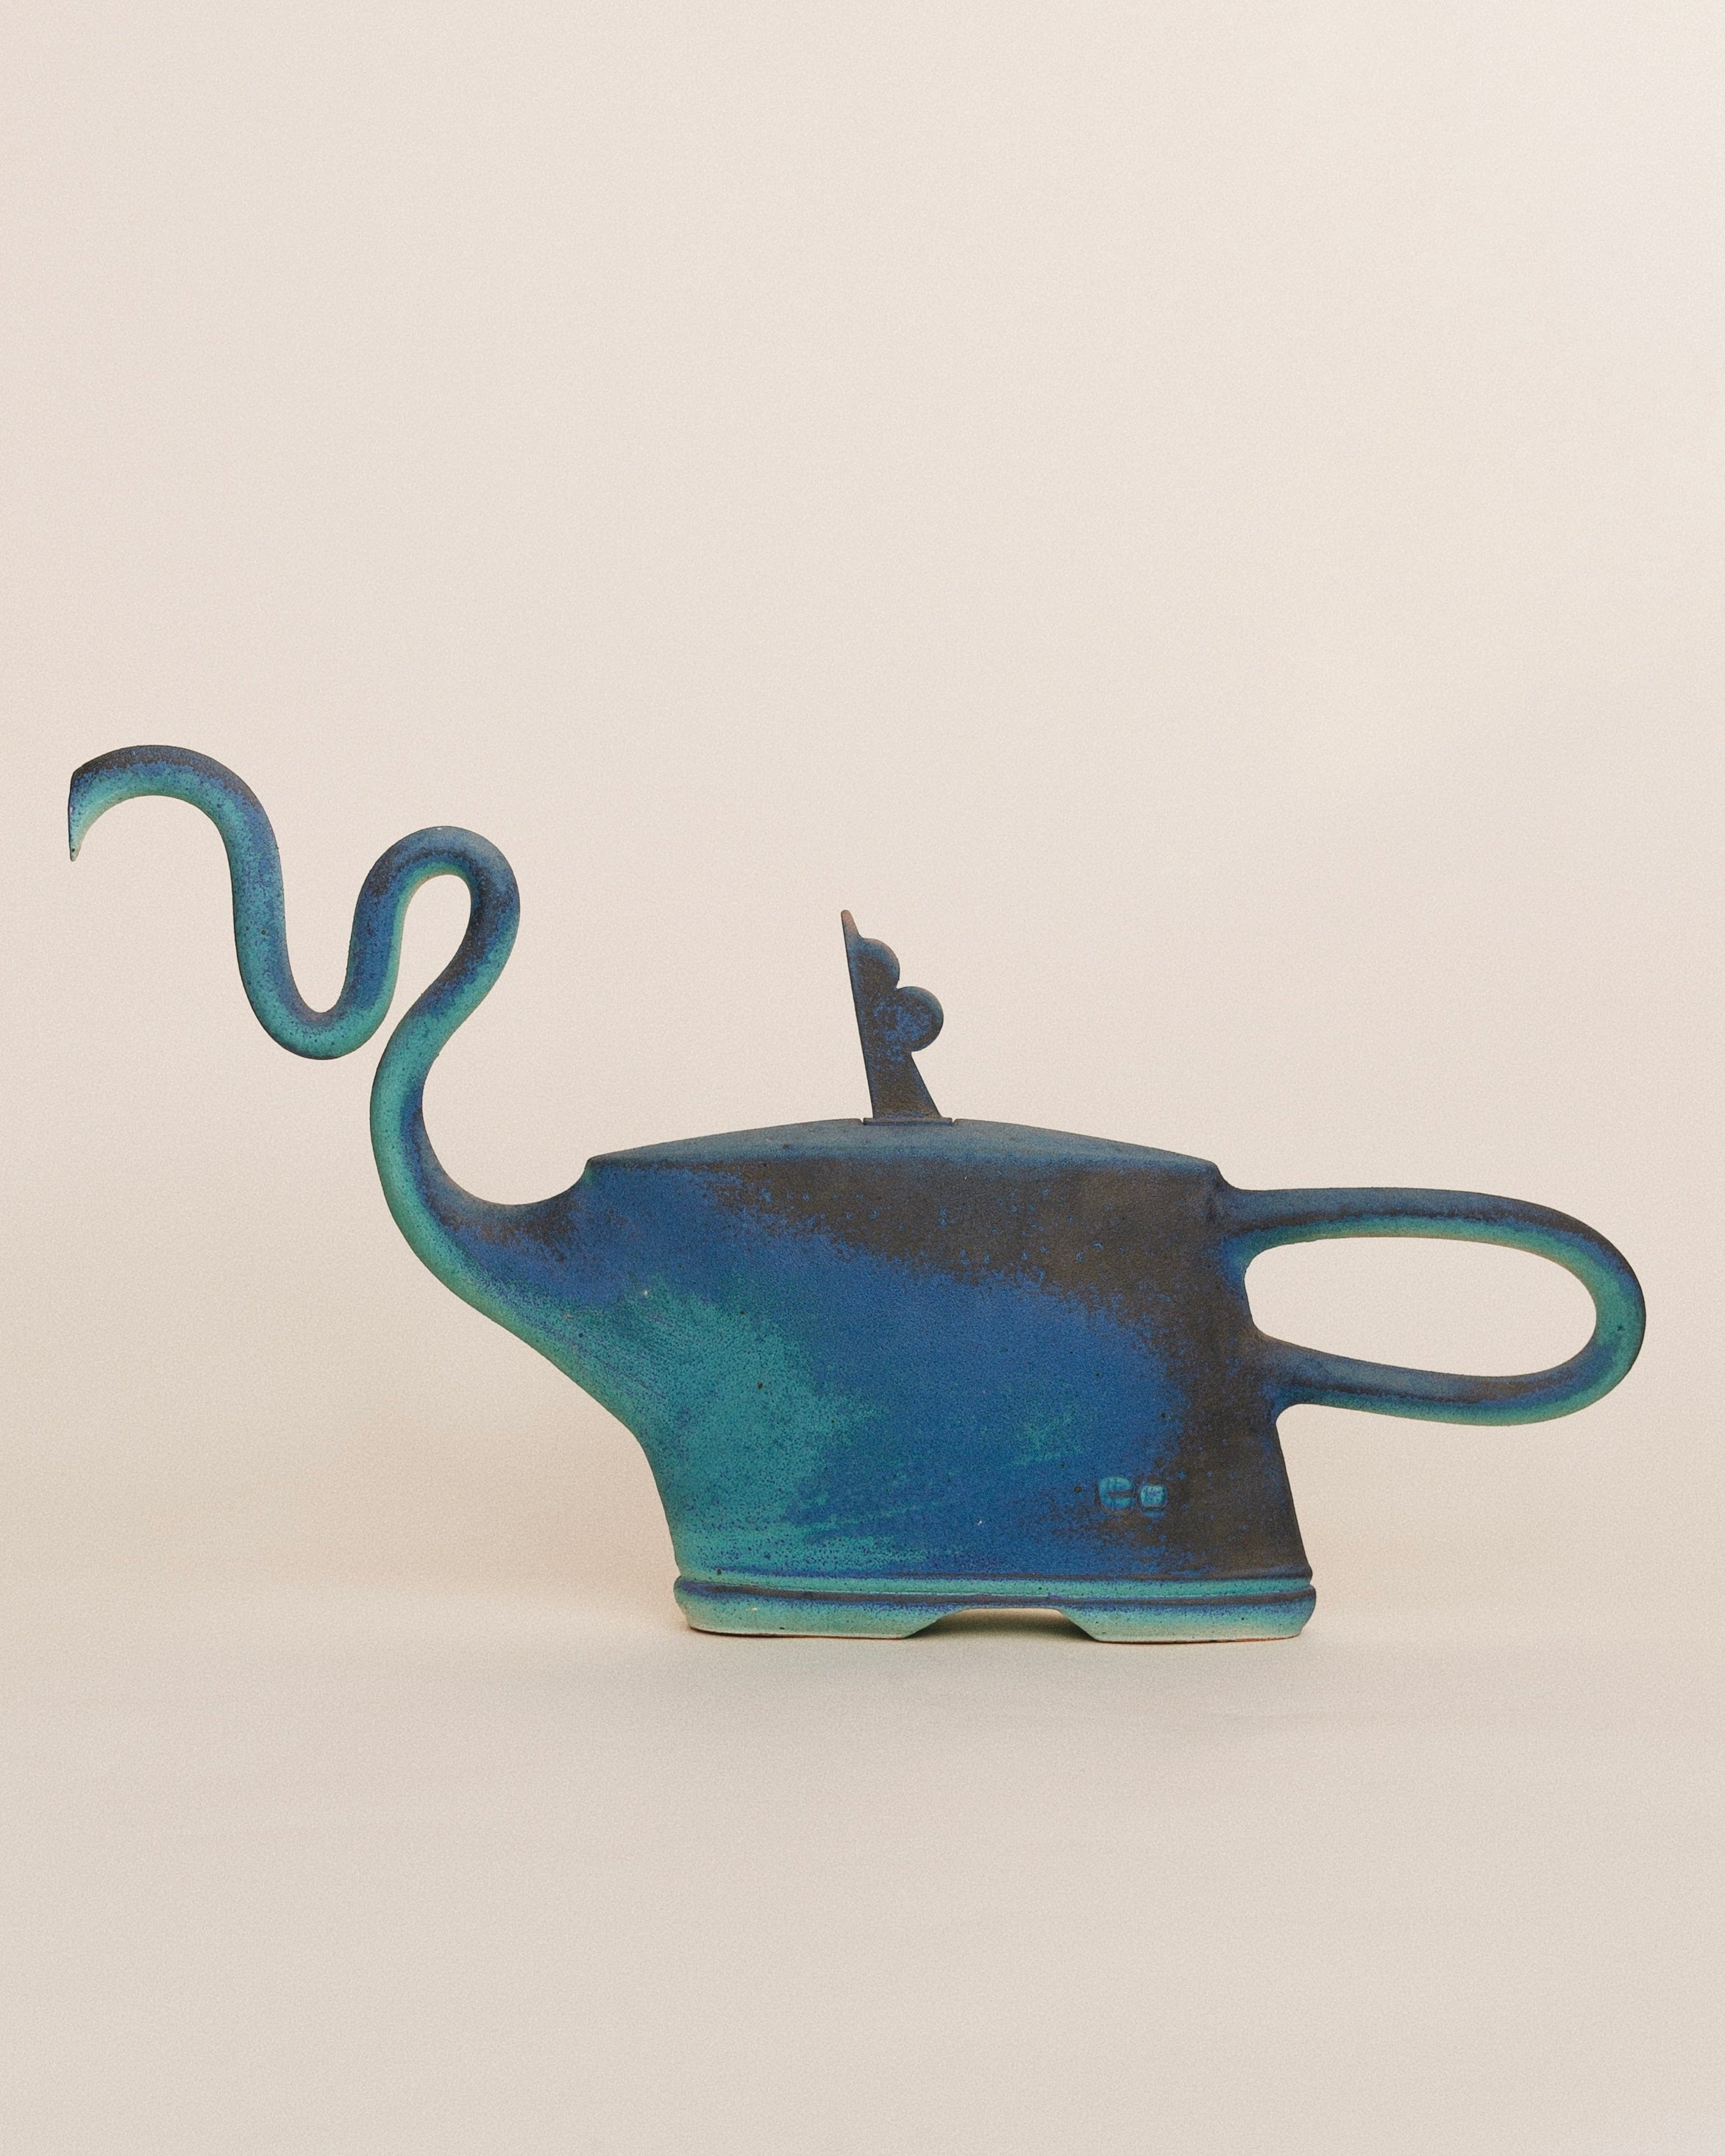 Oversized Teapot Sculpture By Patrick Horsley